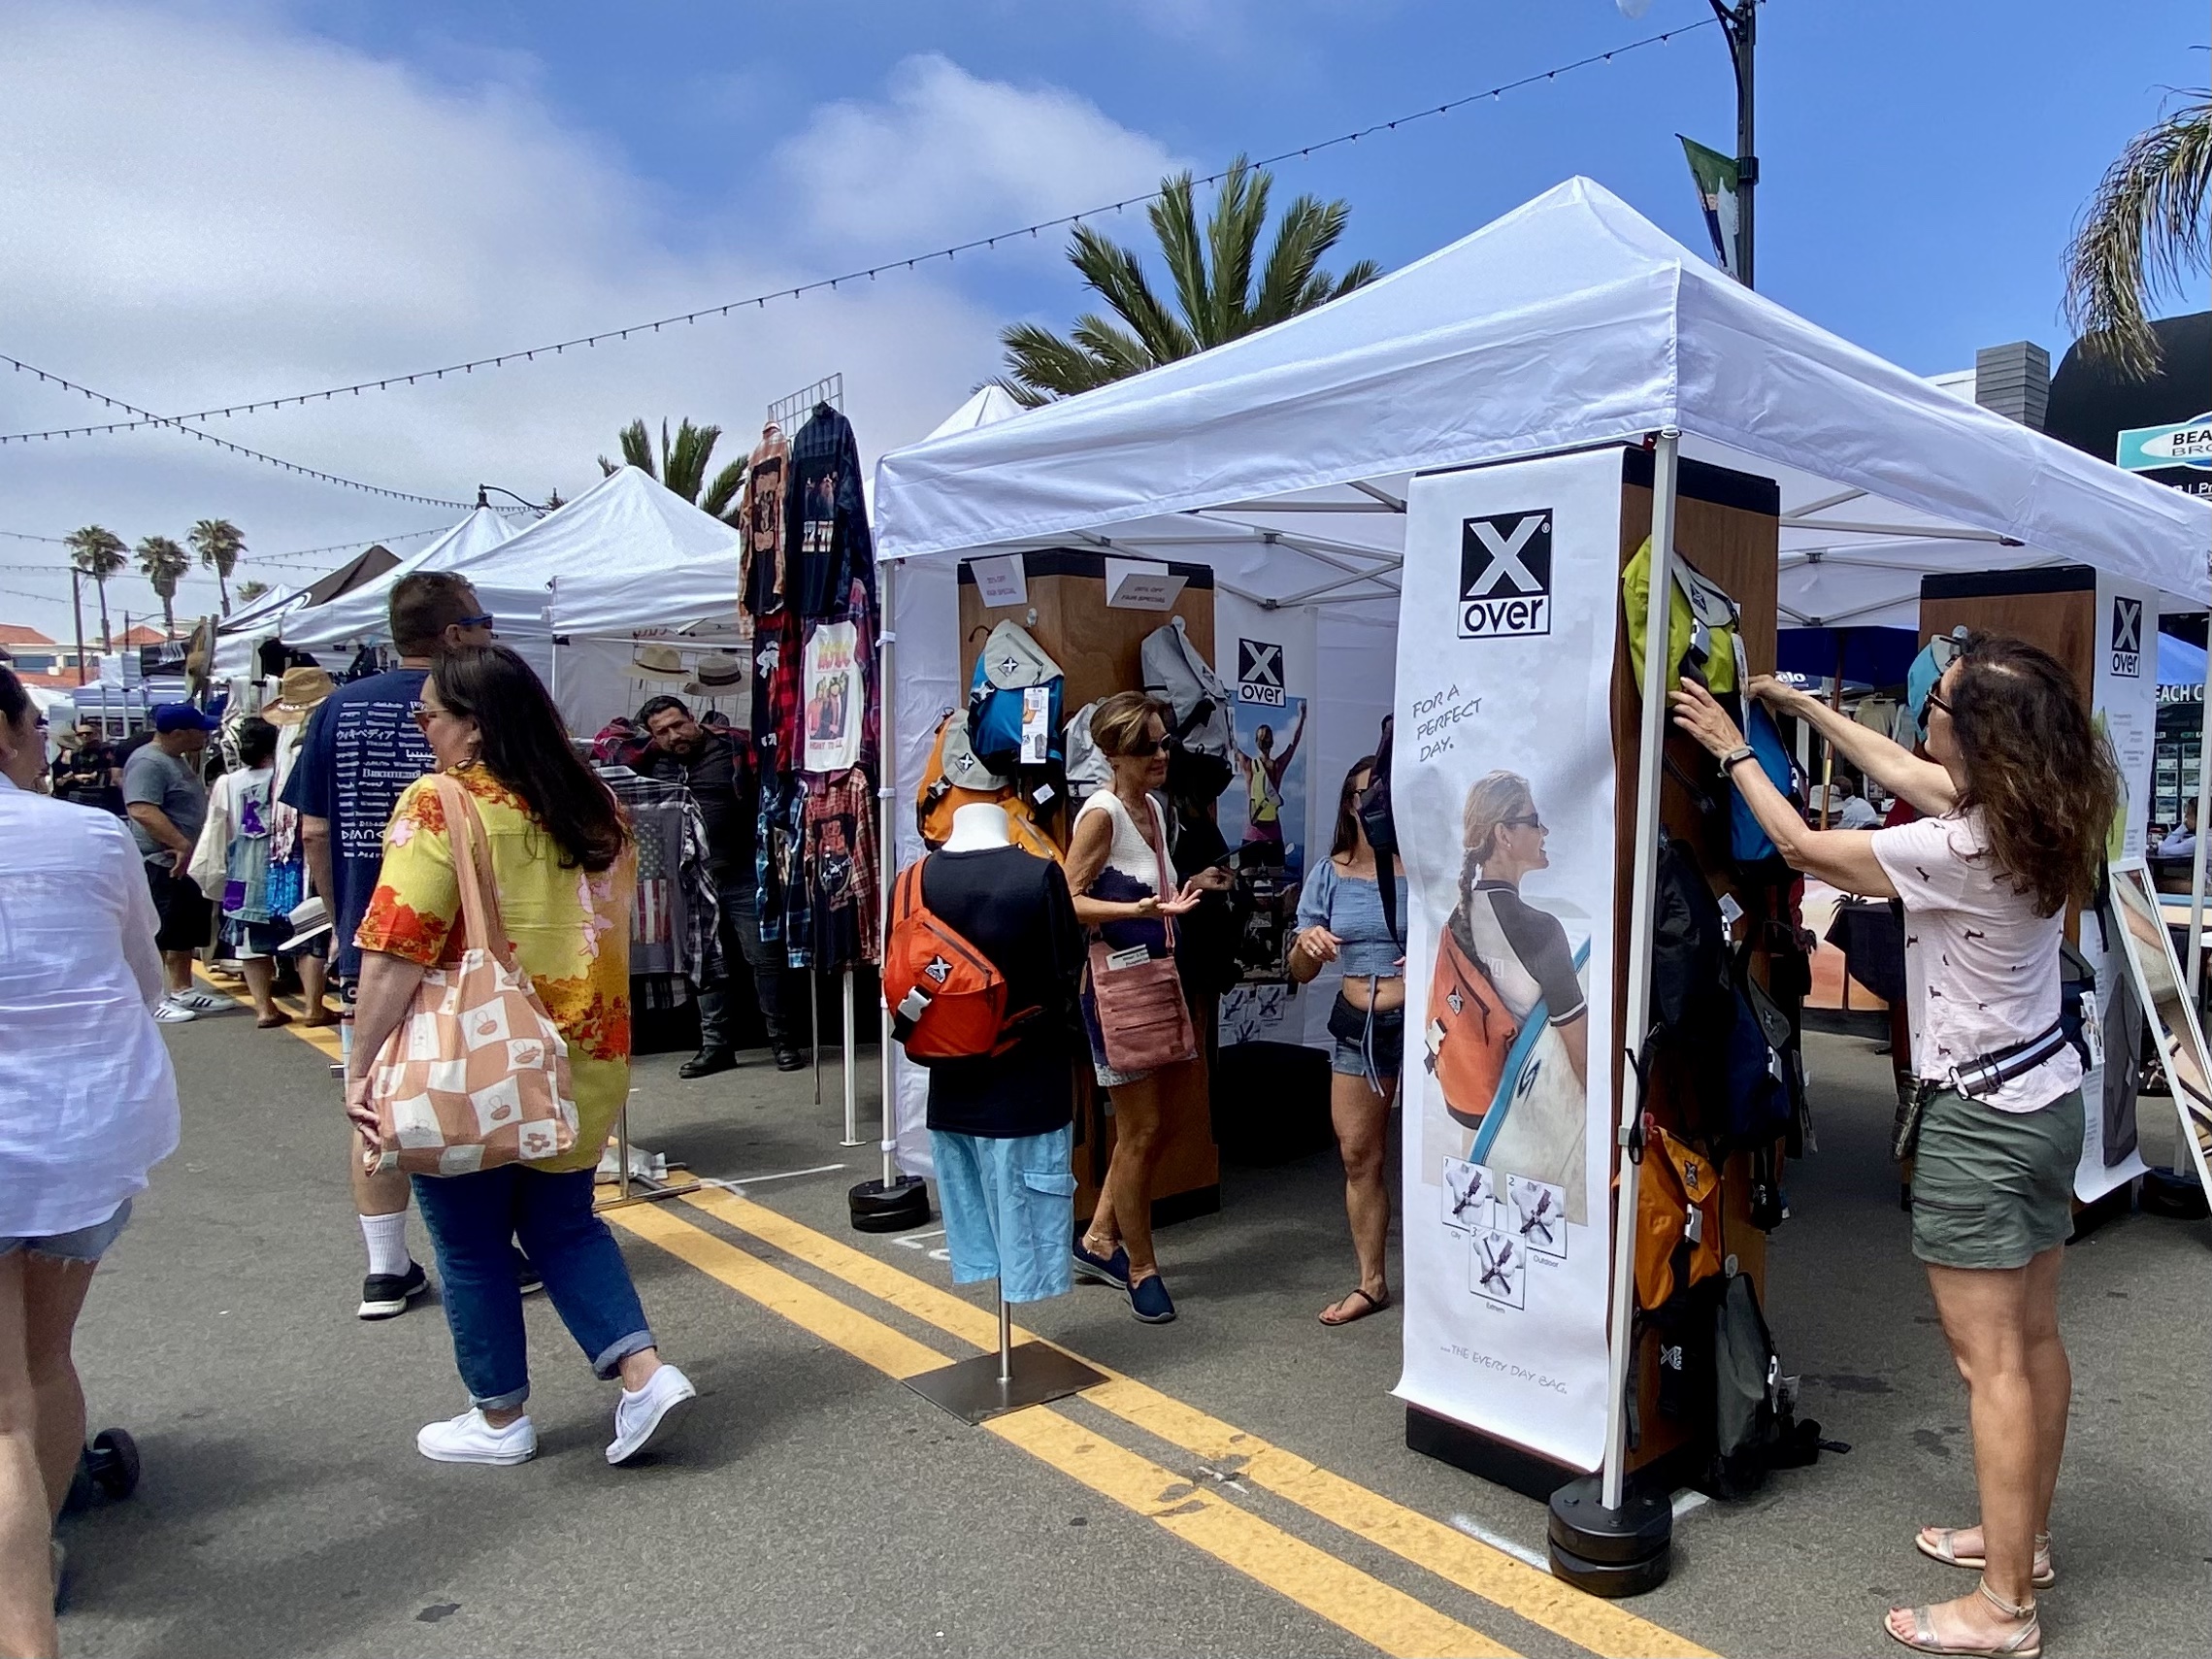 X-over pop up booth in Redondo Beach